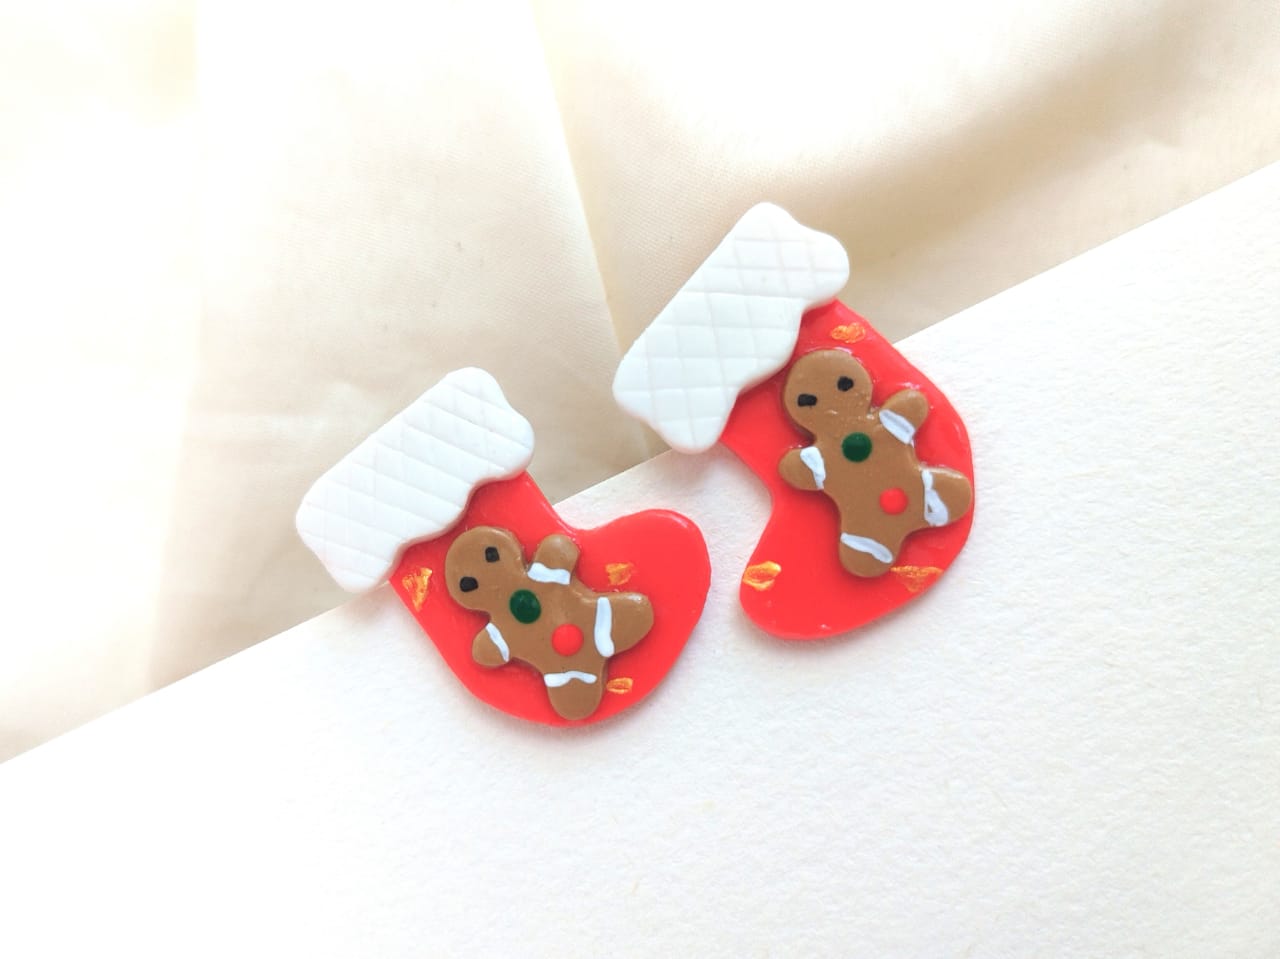 Ira Holiday Studs | snowflake mocha latte coffee cup tree gingerbread man candy cane knit mitten holly leaf Bow polymer clay Christmas earrings  Etsy’s Pick